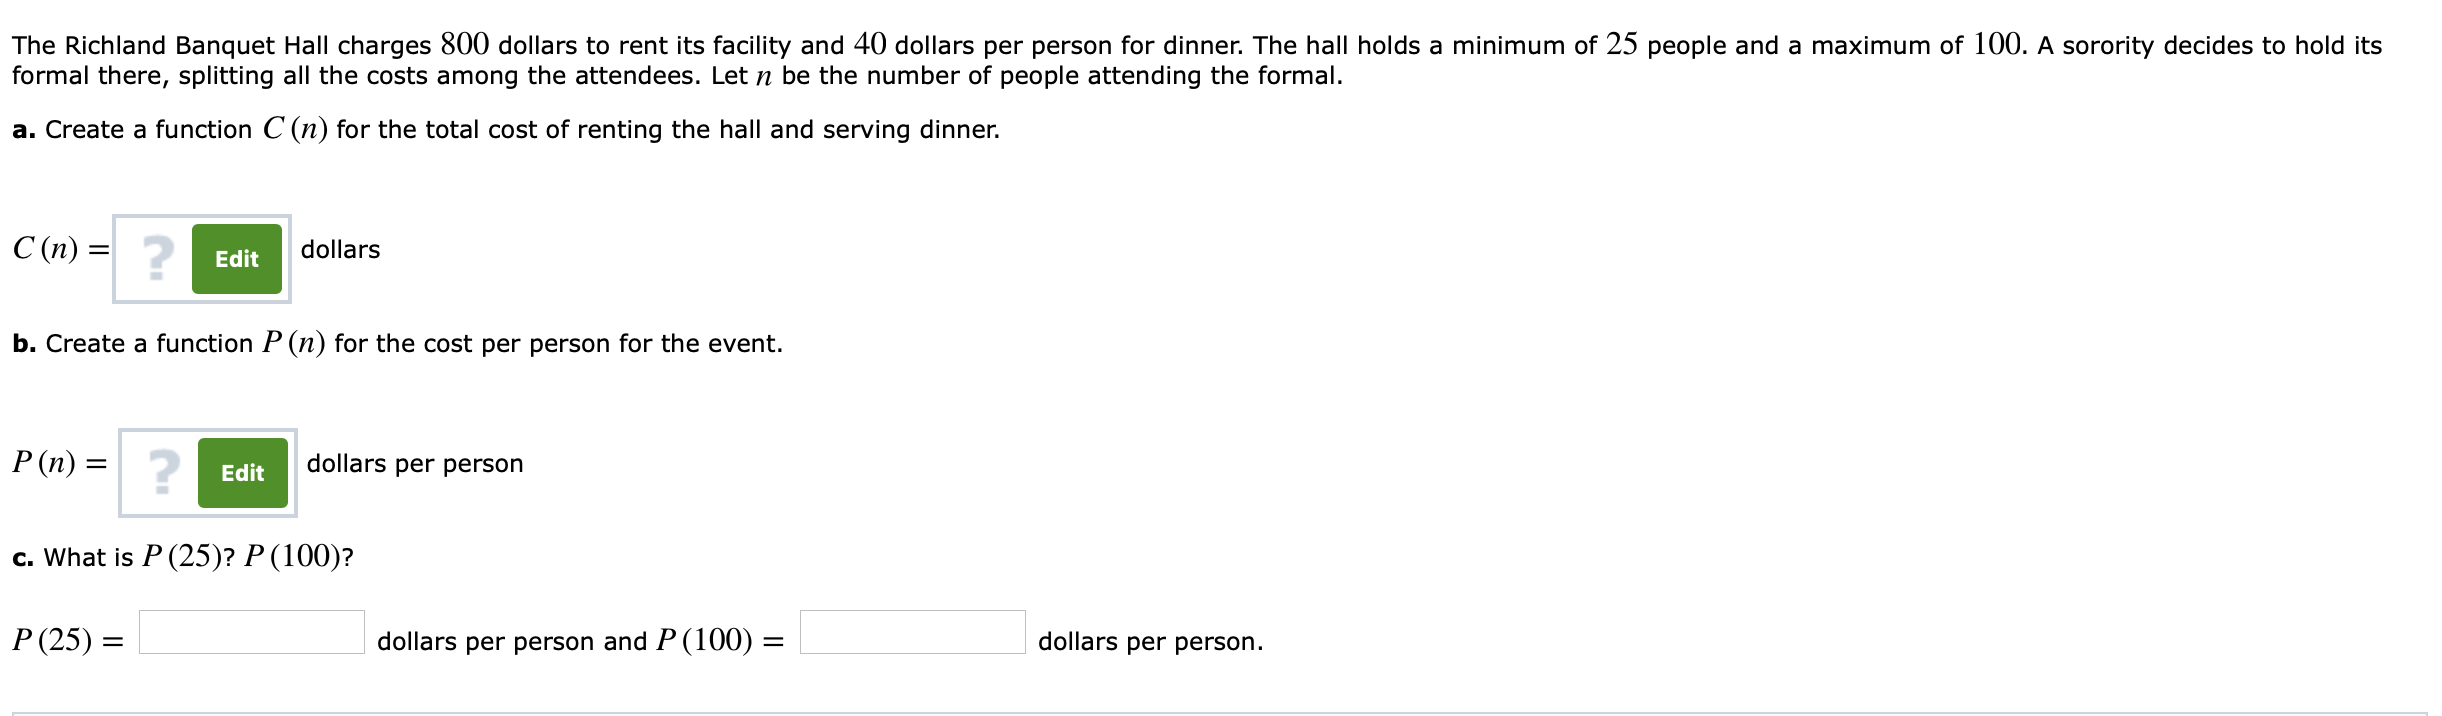 The Richland Banquet Hall charges 800 dollars to rent its facility and 40 dollars per person for dinner. The hall holds a minimum of 25 people and a maximum of 100. A sorority decides to hold its
formal there, splitting all the costs among the attendees. Let n be the number of people attending the formal.
a. Create a function C (n) for the total cost of renting the hall and serving dinner.
C(n) =
2
dollars
Edit
b. Create a function P(n) for the cost per person for the event.
dollars per person
Edit
c. What is P (25)? P (100)?
P(25)
dollars per person and P (100)-
dollars per person
